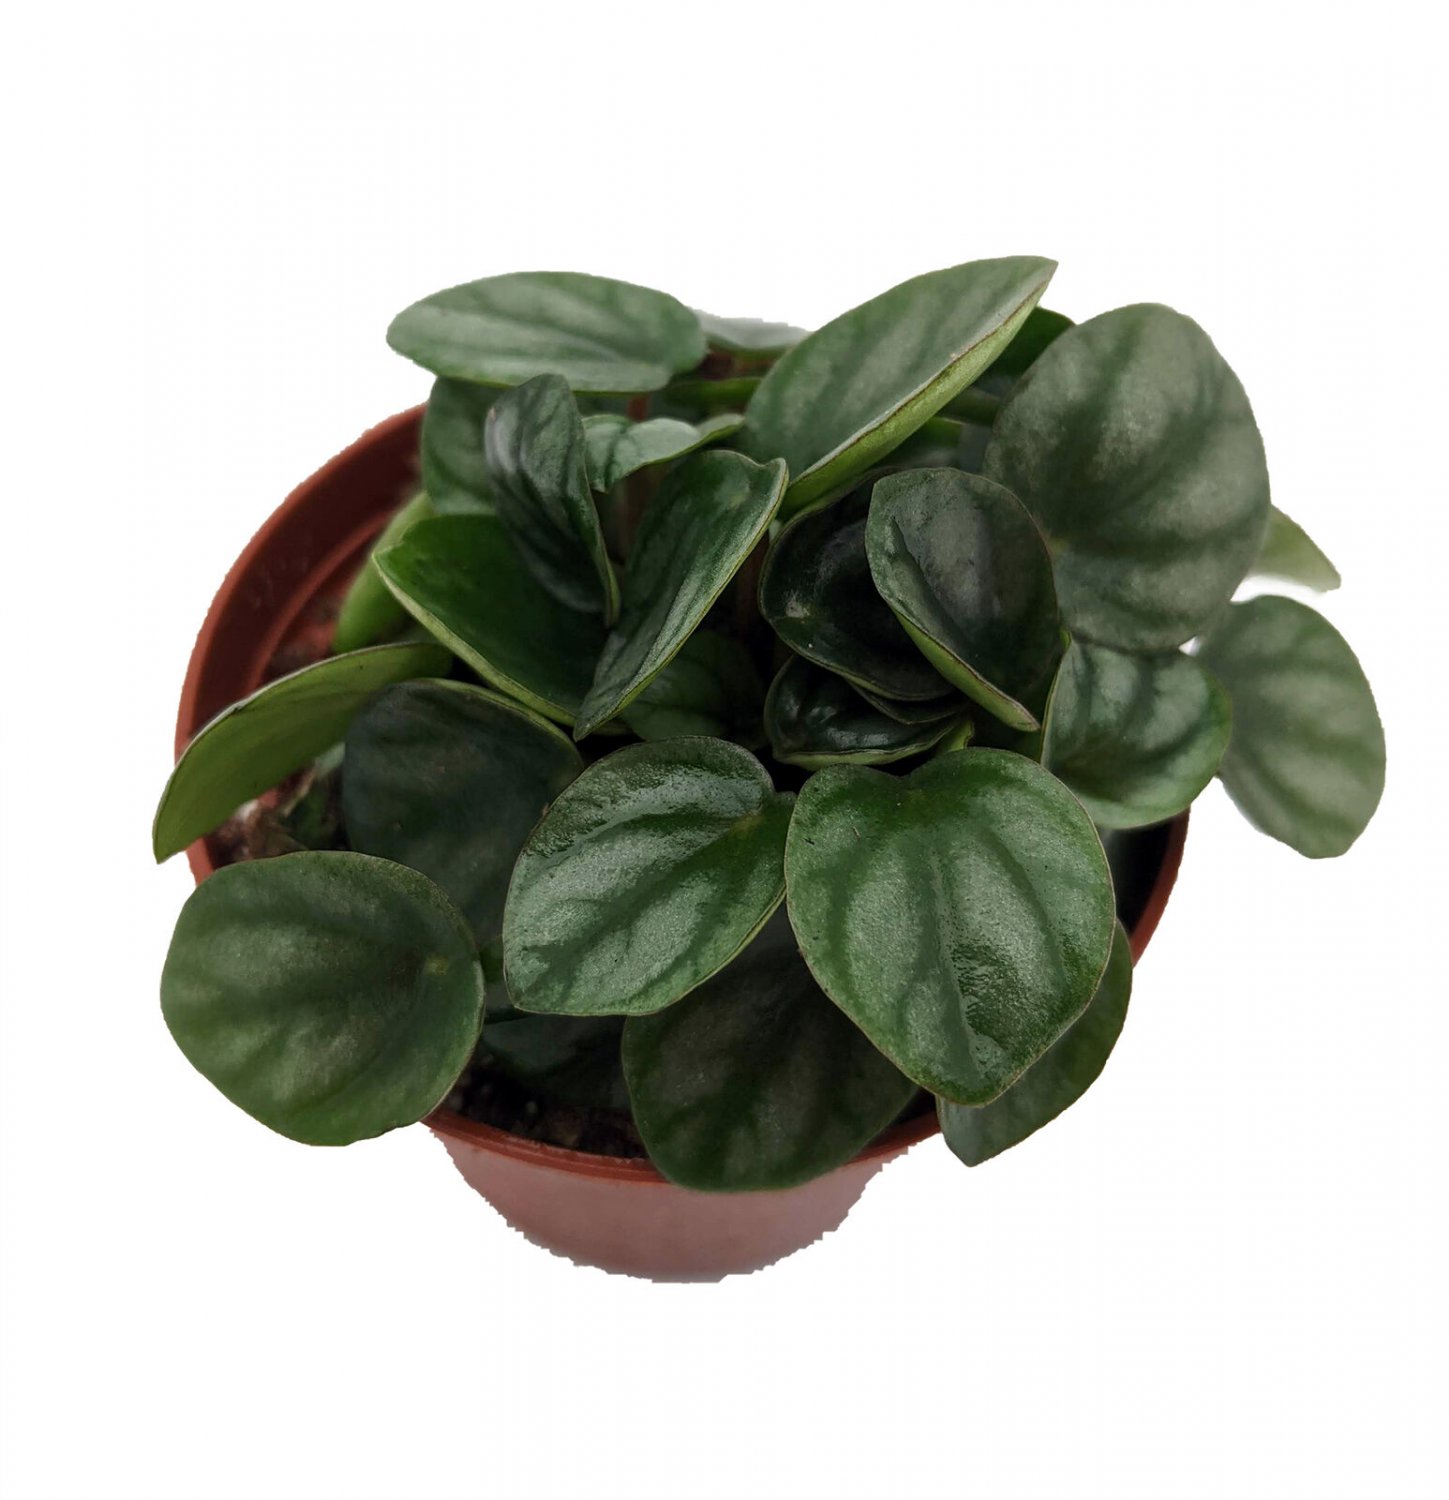 Little Toscani Peperomia Plant - 2.5" Pot - Easy to Grow!